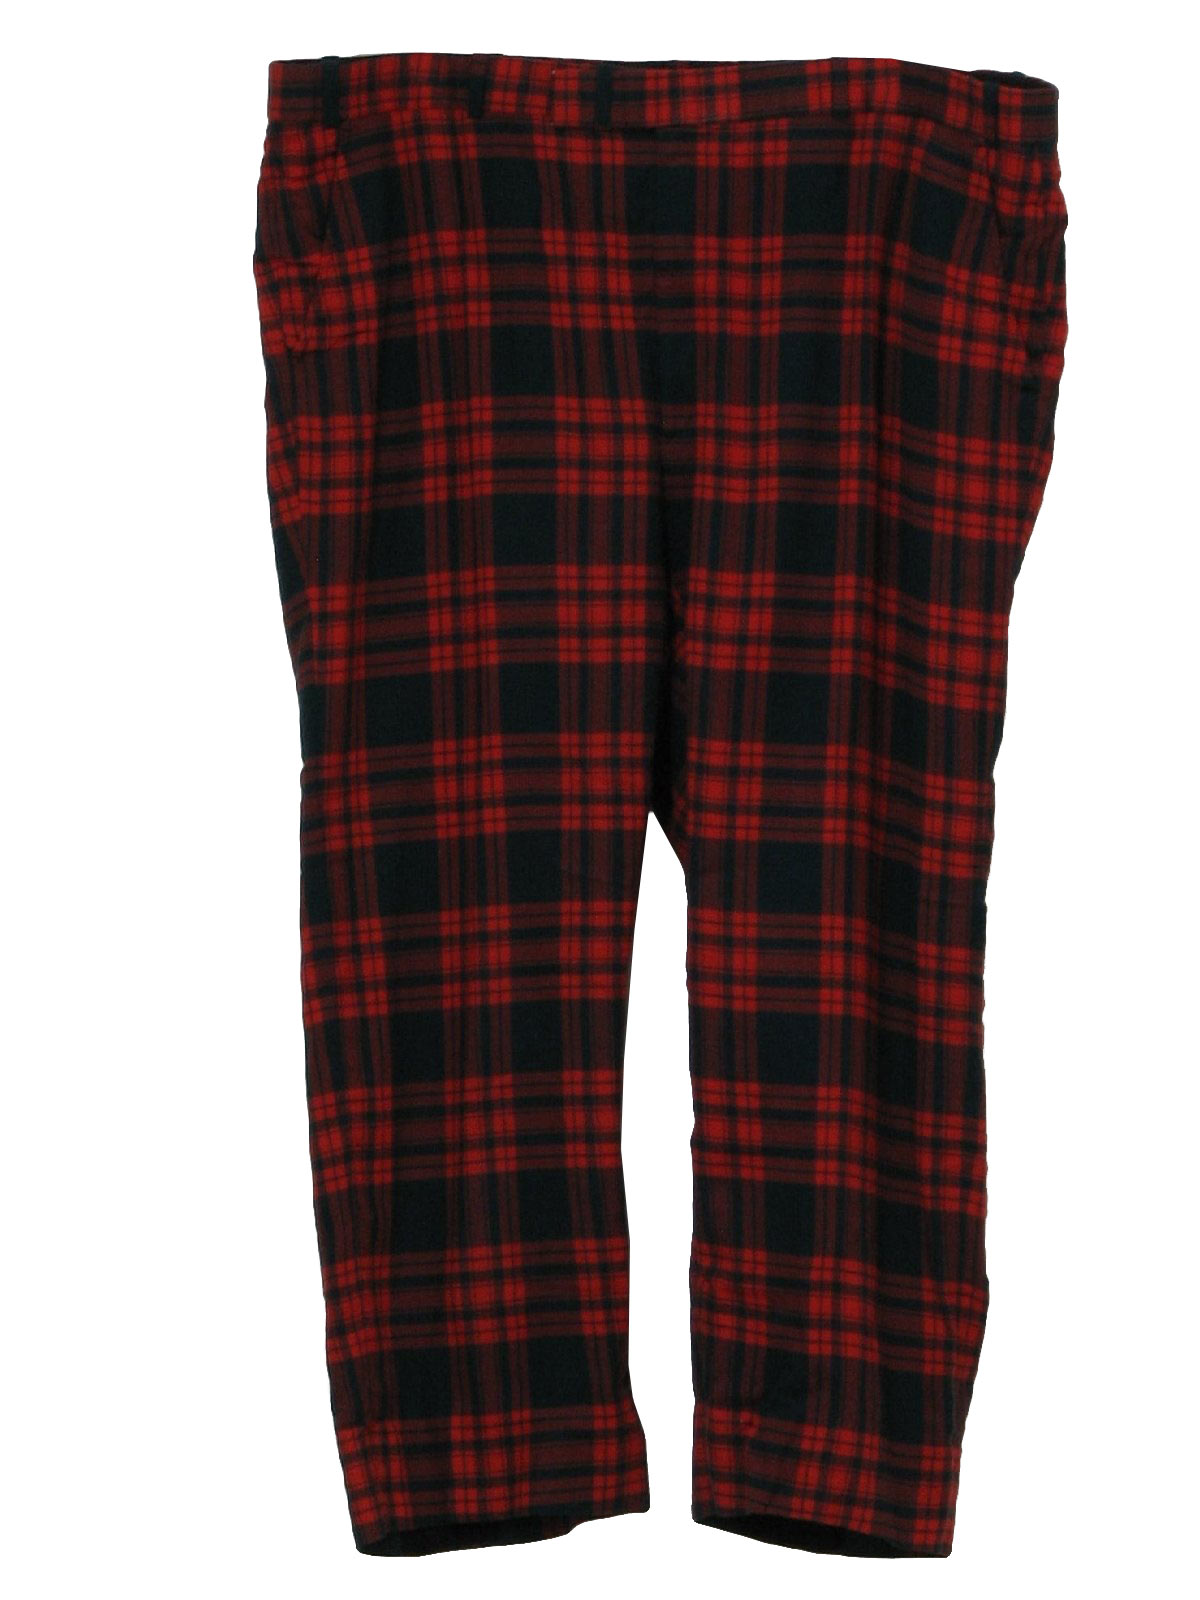 Retro 70's Pants: 70s -Care Label- Mens red and green plaid print ...